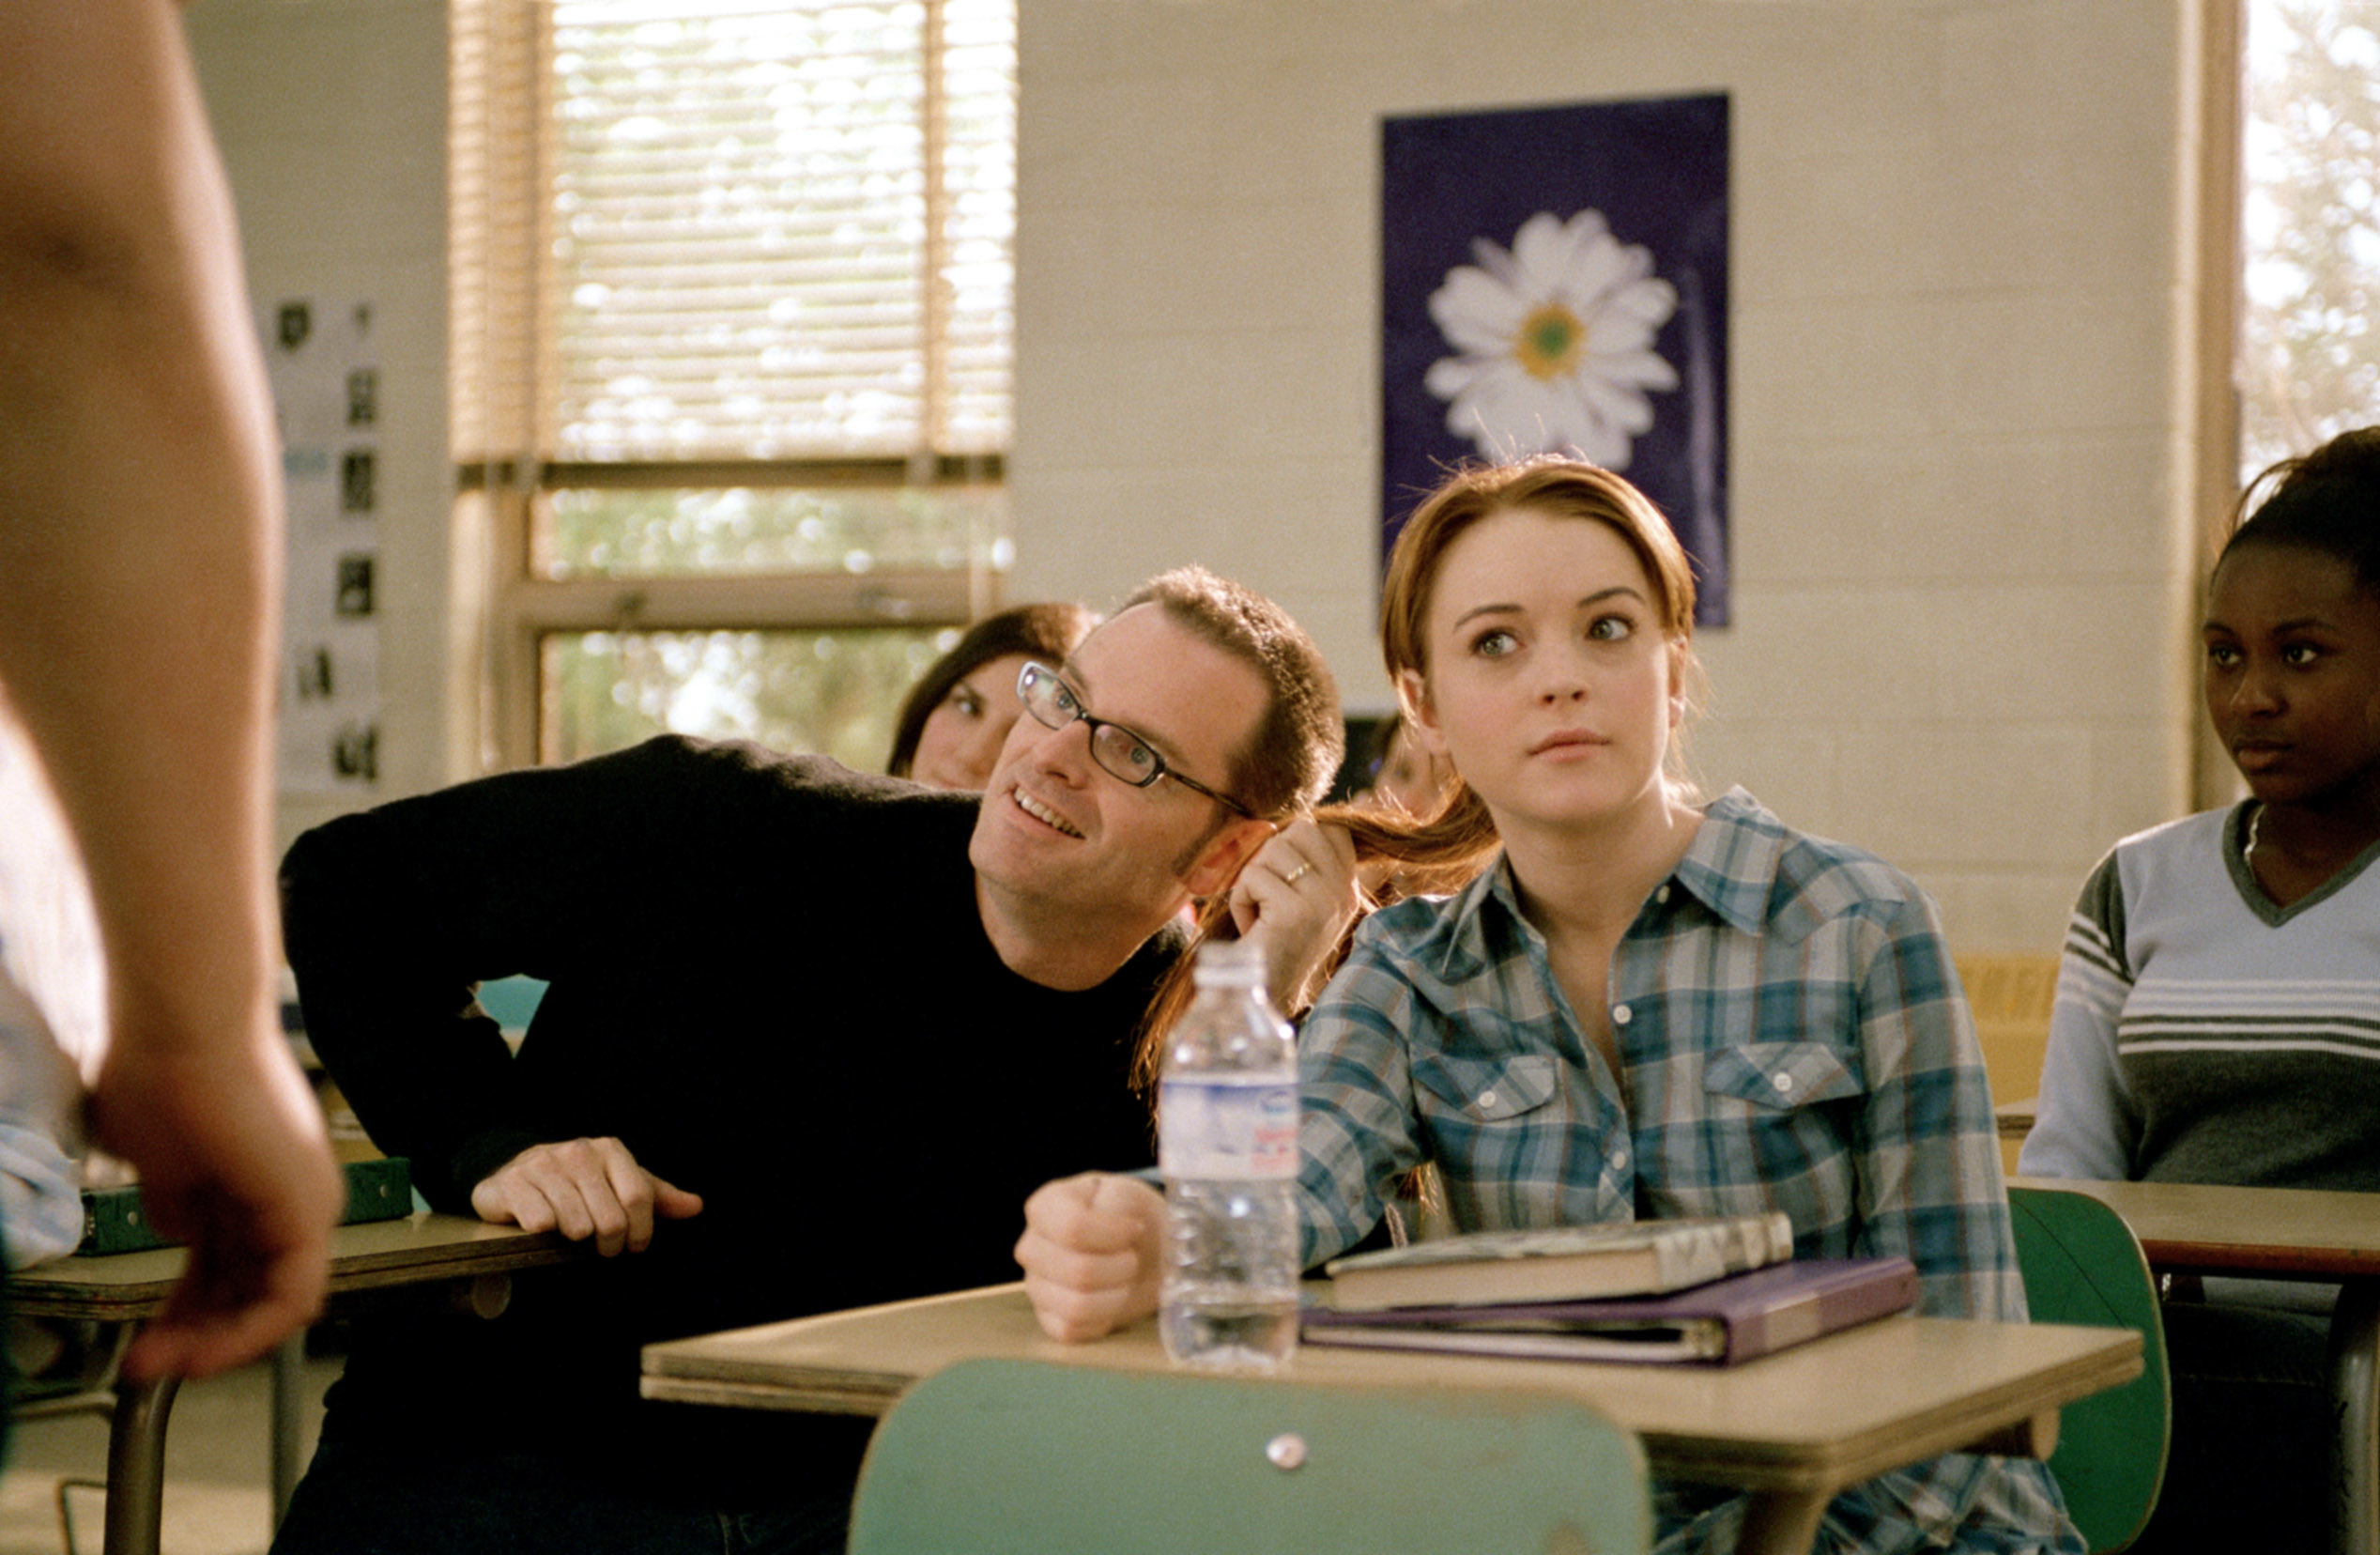 Lindsay Lohan in a classroom scene from a movie, looking surprised with a water bottle and notebooks on the desk